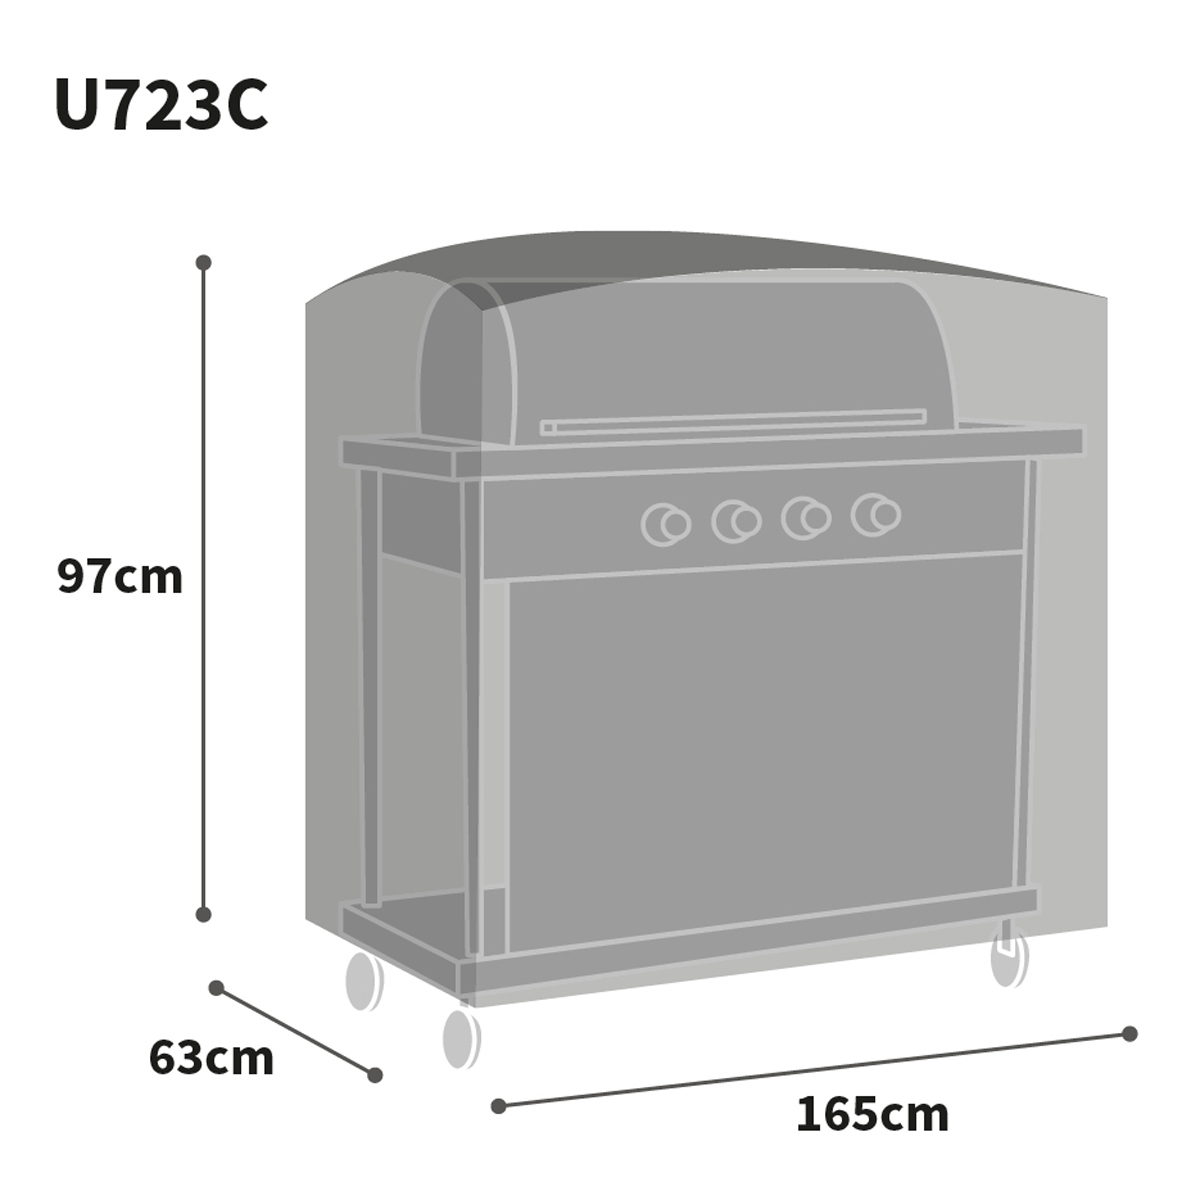 Bosmere Ultimate Protector Kitchen Barbecue Set Cover Graphic Size Guide